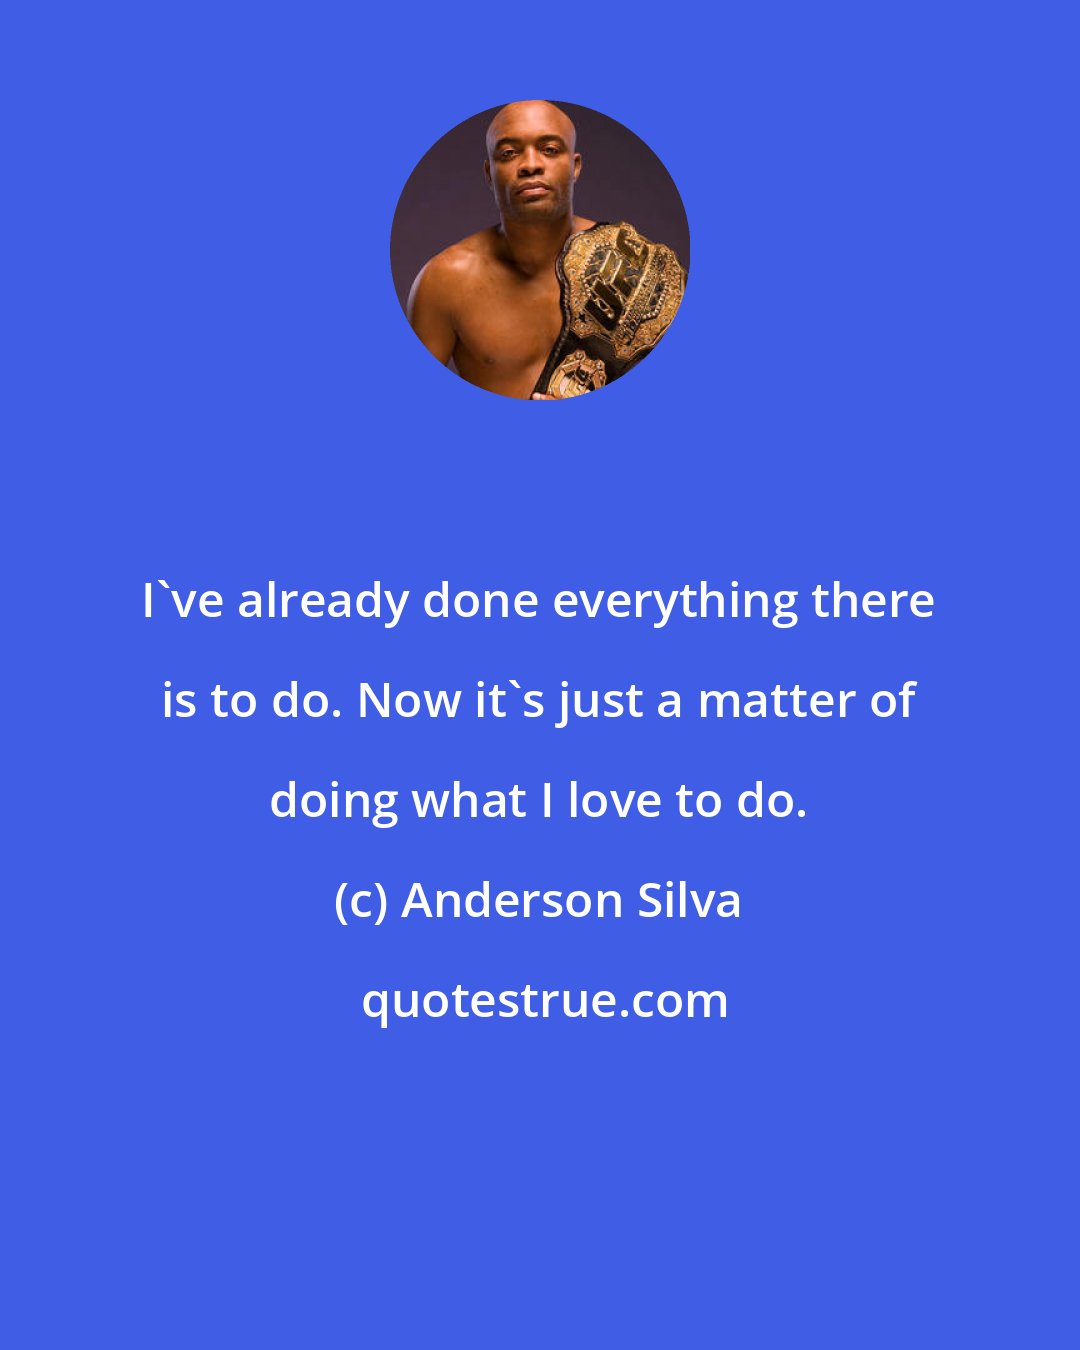 Anderson Silva: I've already done everything there is to do. Now it's just a matter of doing what I love to do.